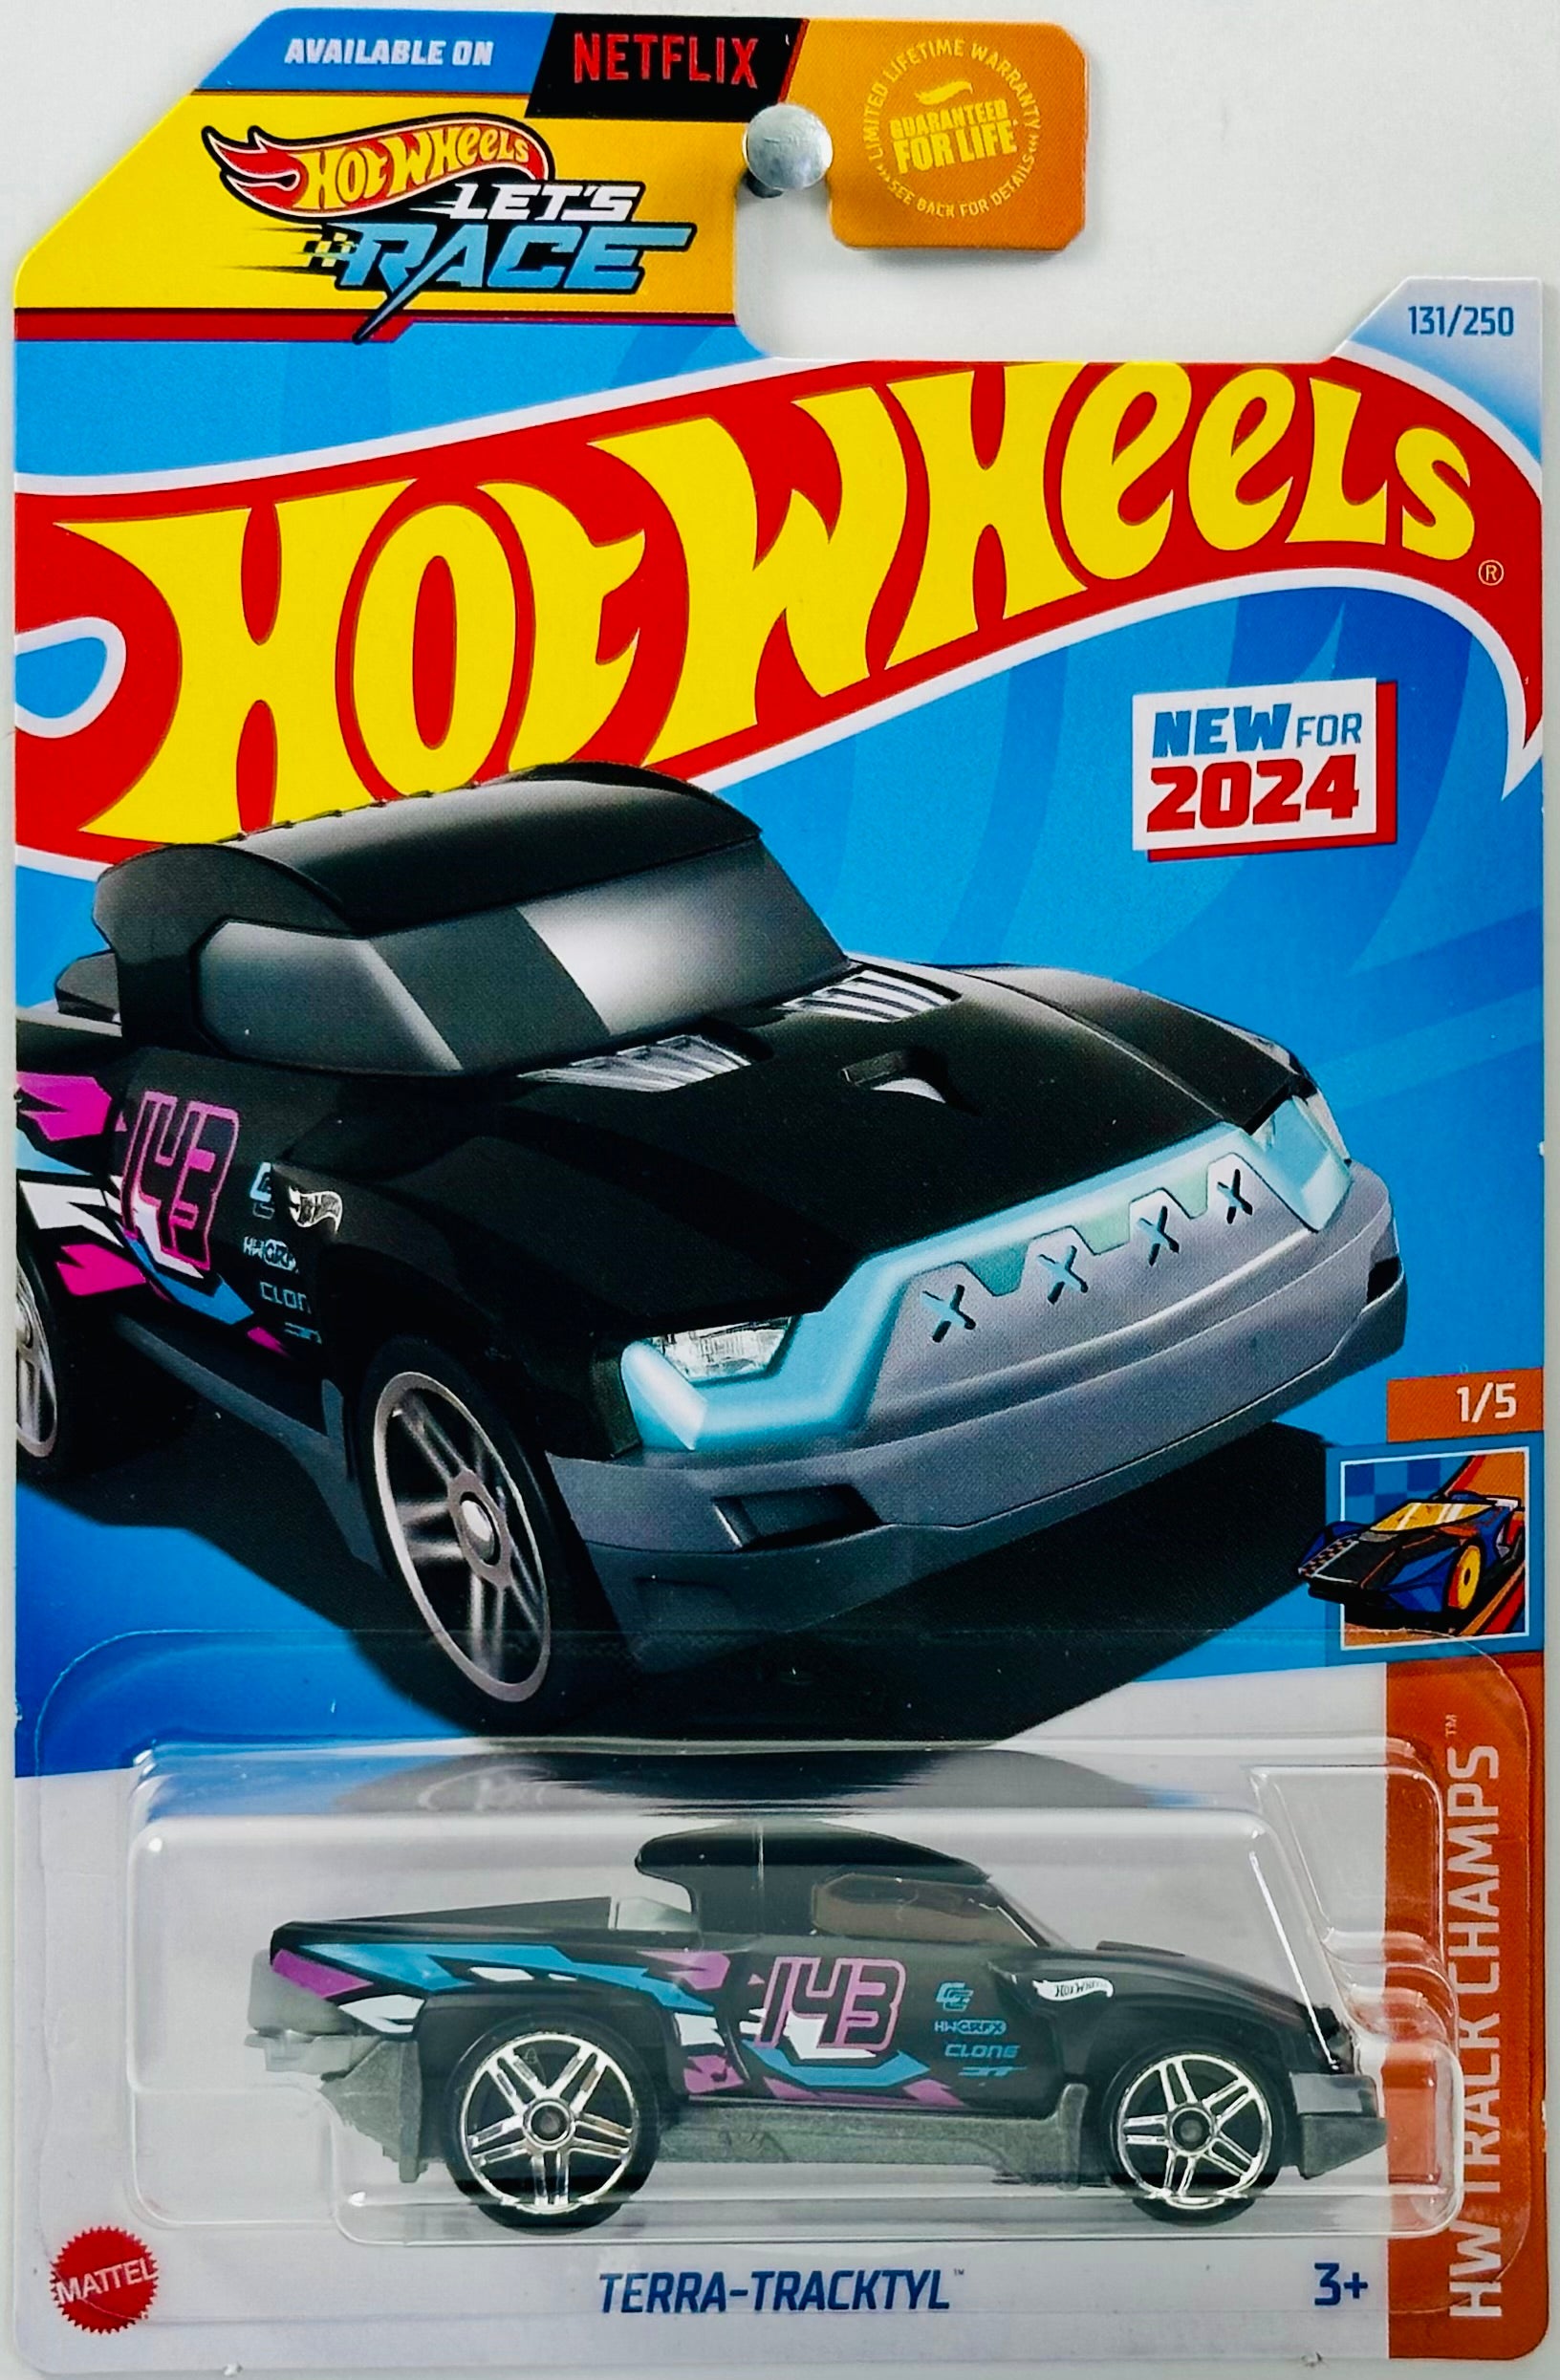 Hot Wheels 2024 - Collector # 131/250 - HW Track Champs 01/05 - New Models  - Terra-Tracktyl - Black - '143' - USA 'Let's Race' Card